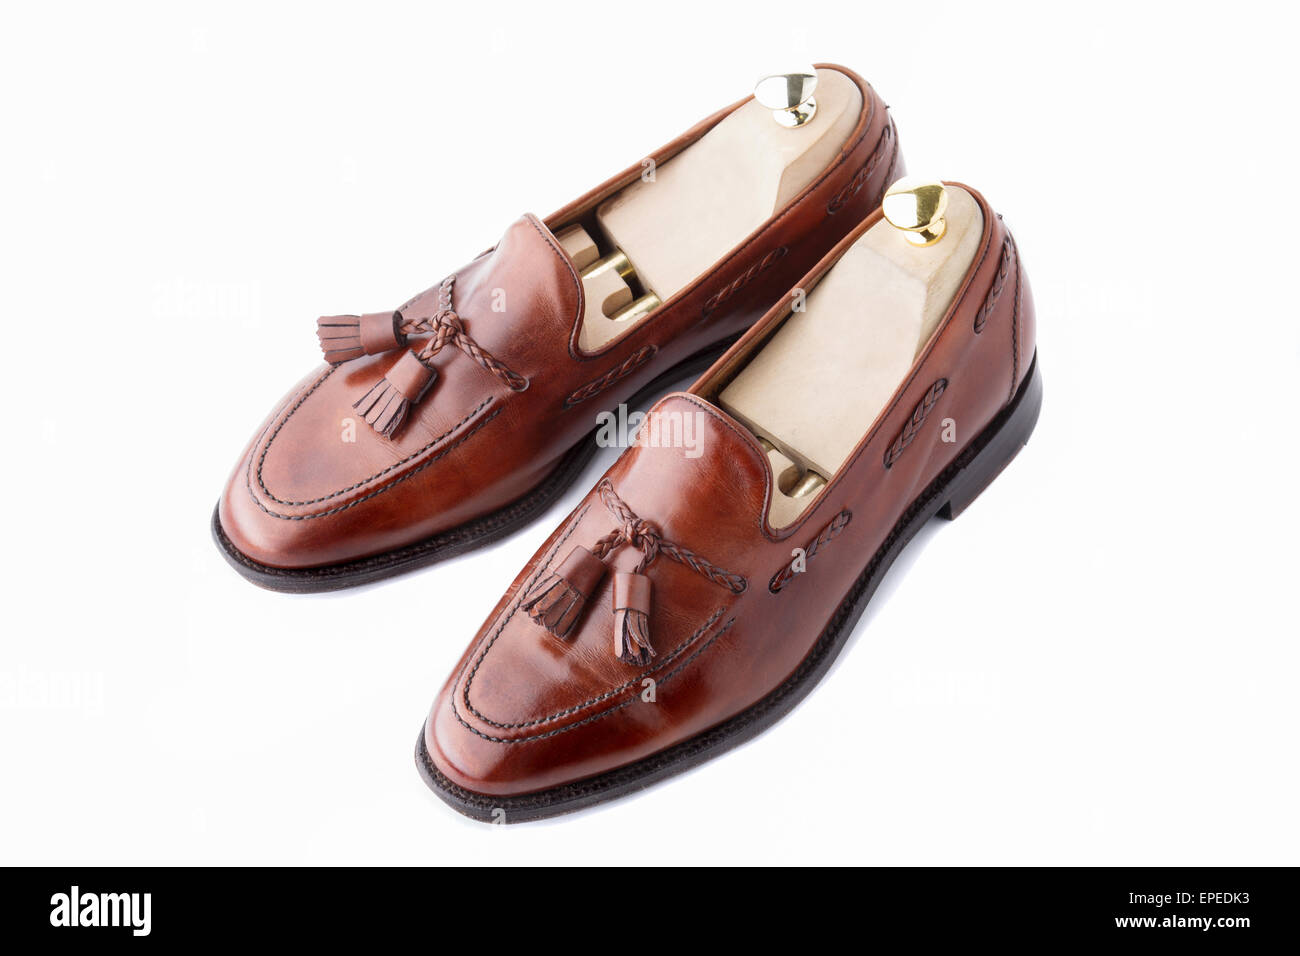 A pair of slightly worn, fine handcrafted tasseled vintage loafers with shoe trees inserted. Isolated on white background. Stock Photo